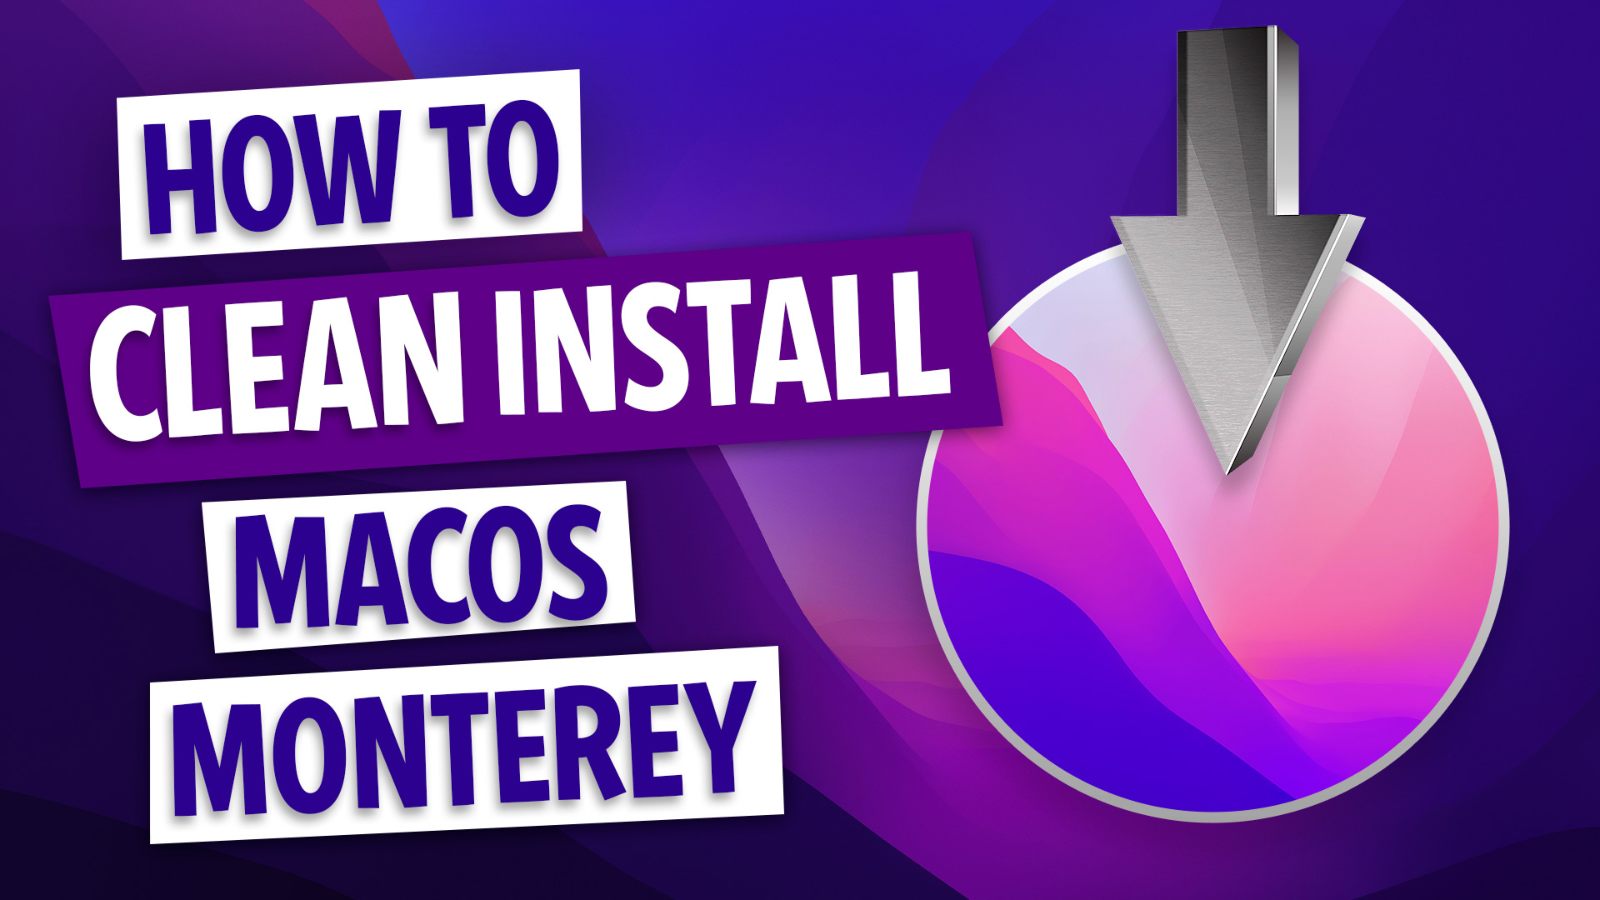 How to Clean Install macOS Monterey in a few Simple Steps